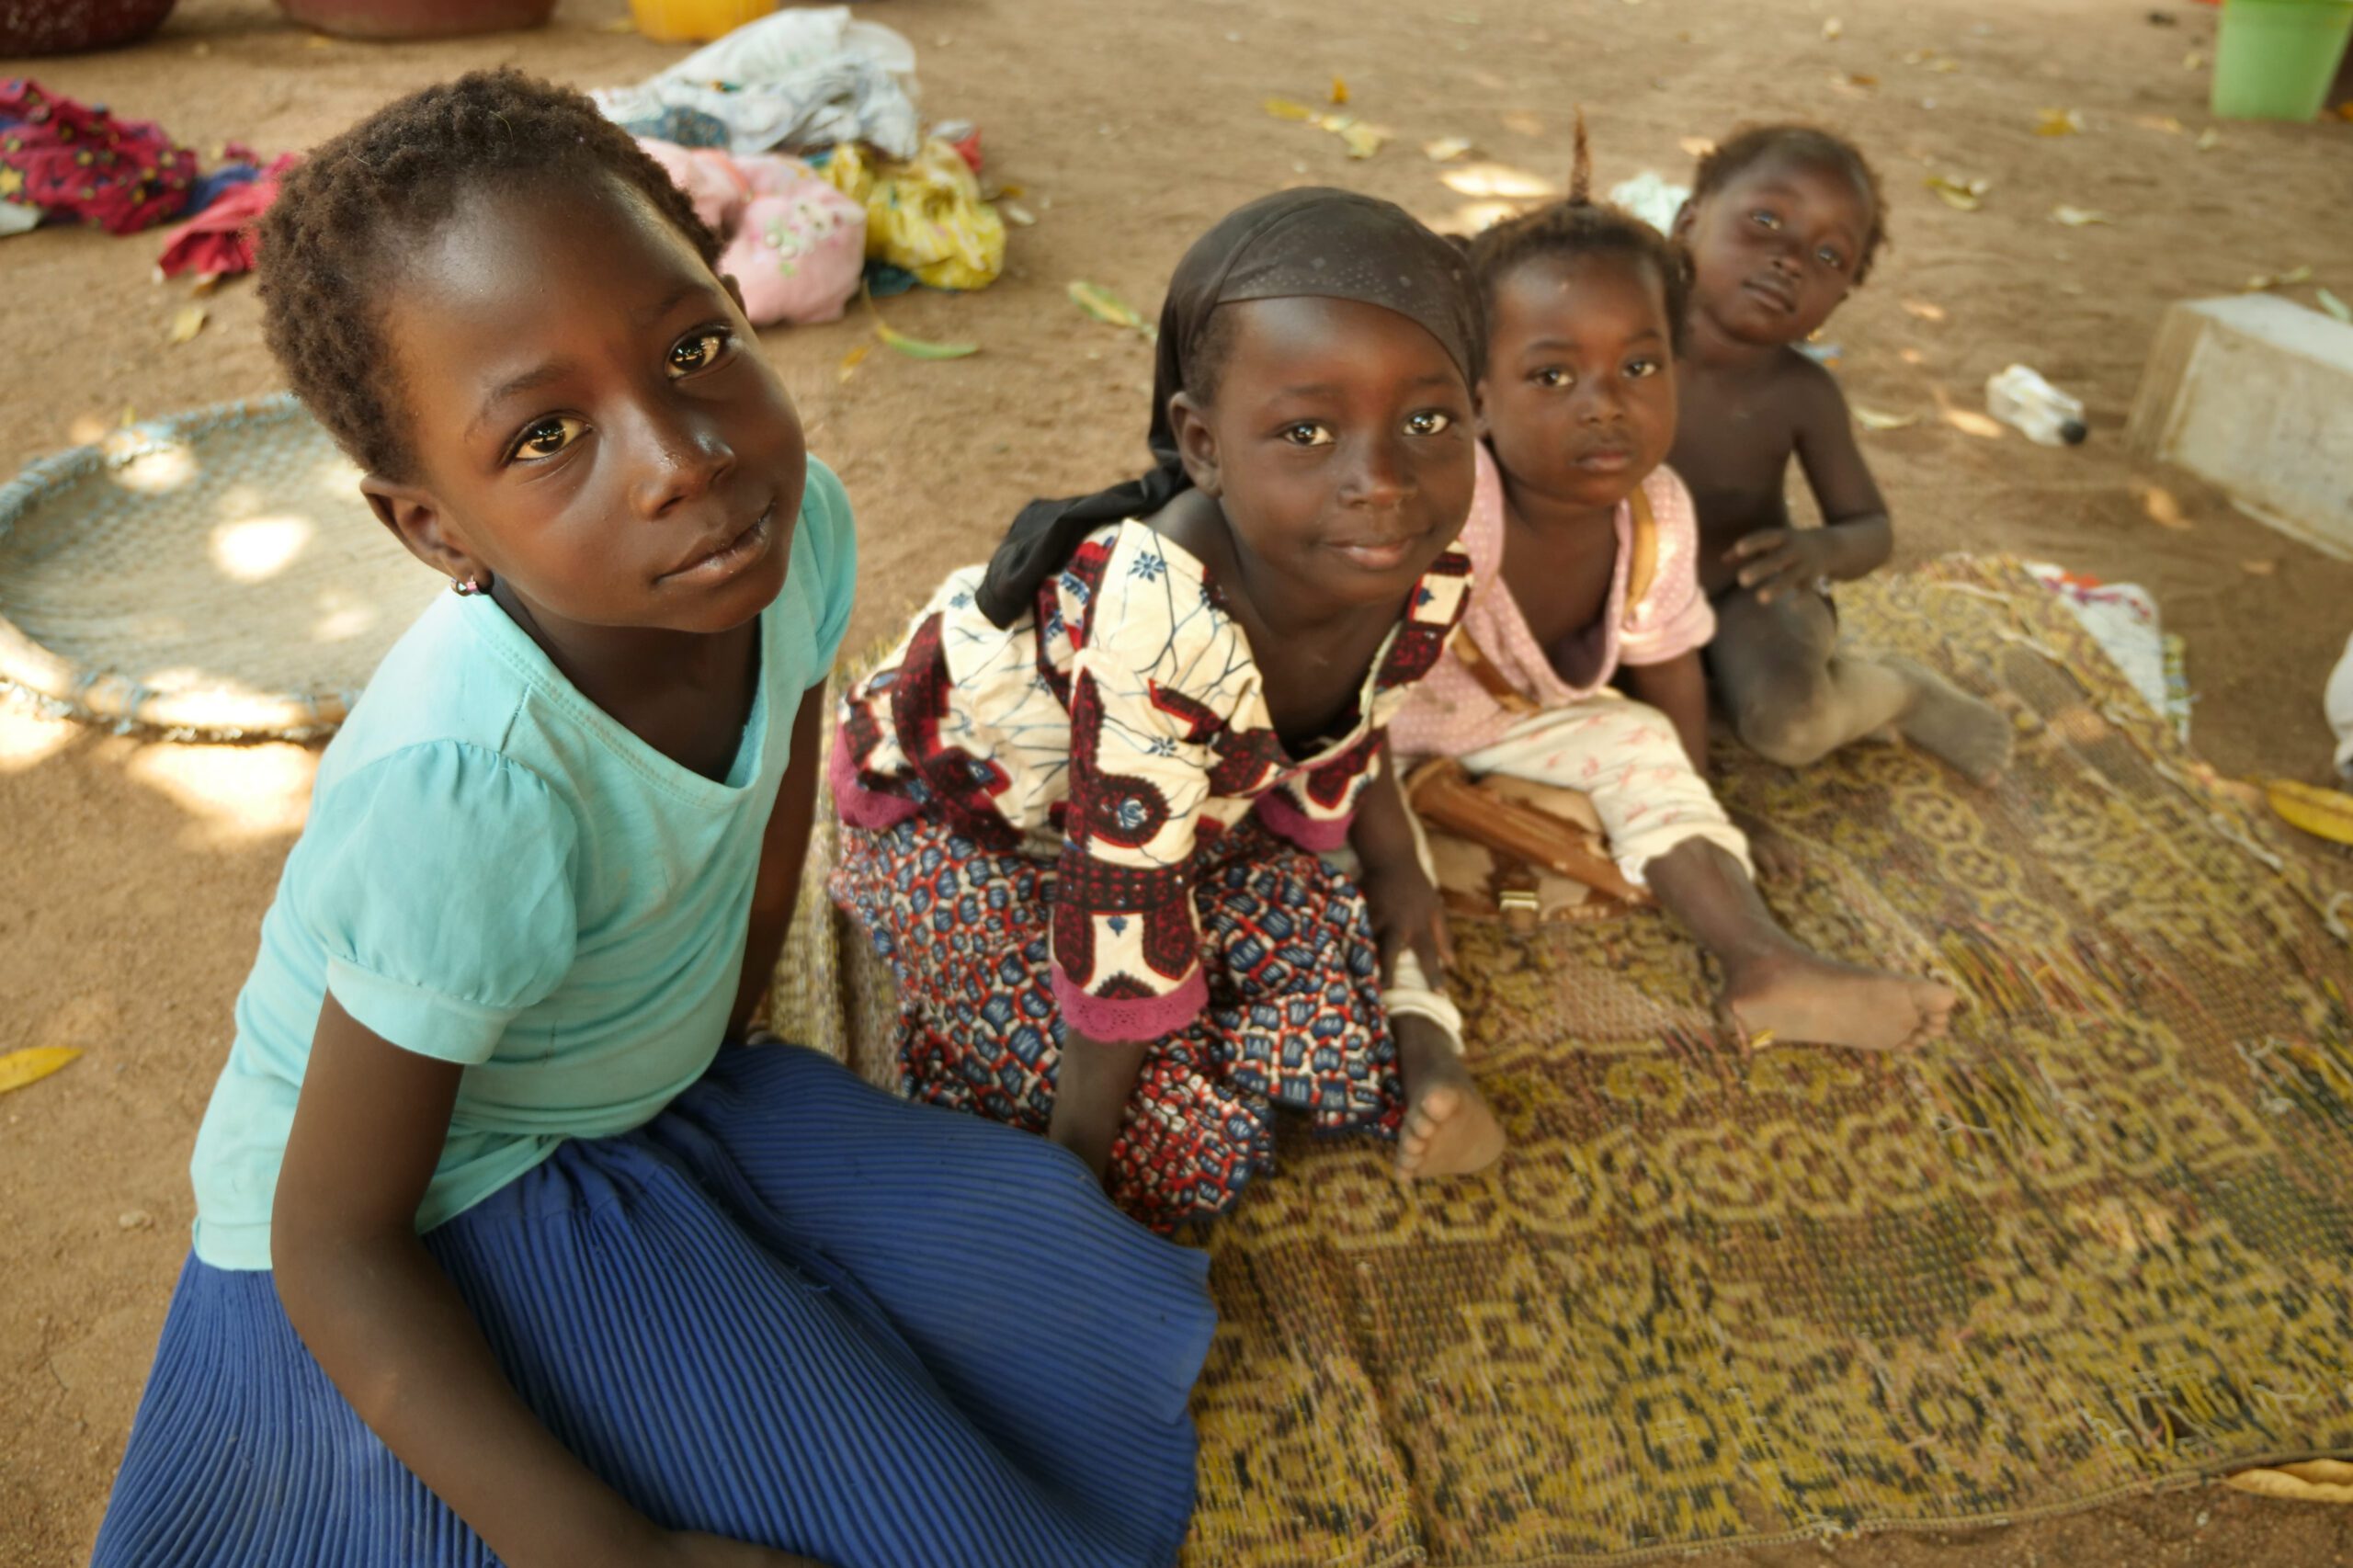 children in Cote d'Ivoire look at the camera